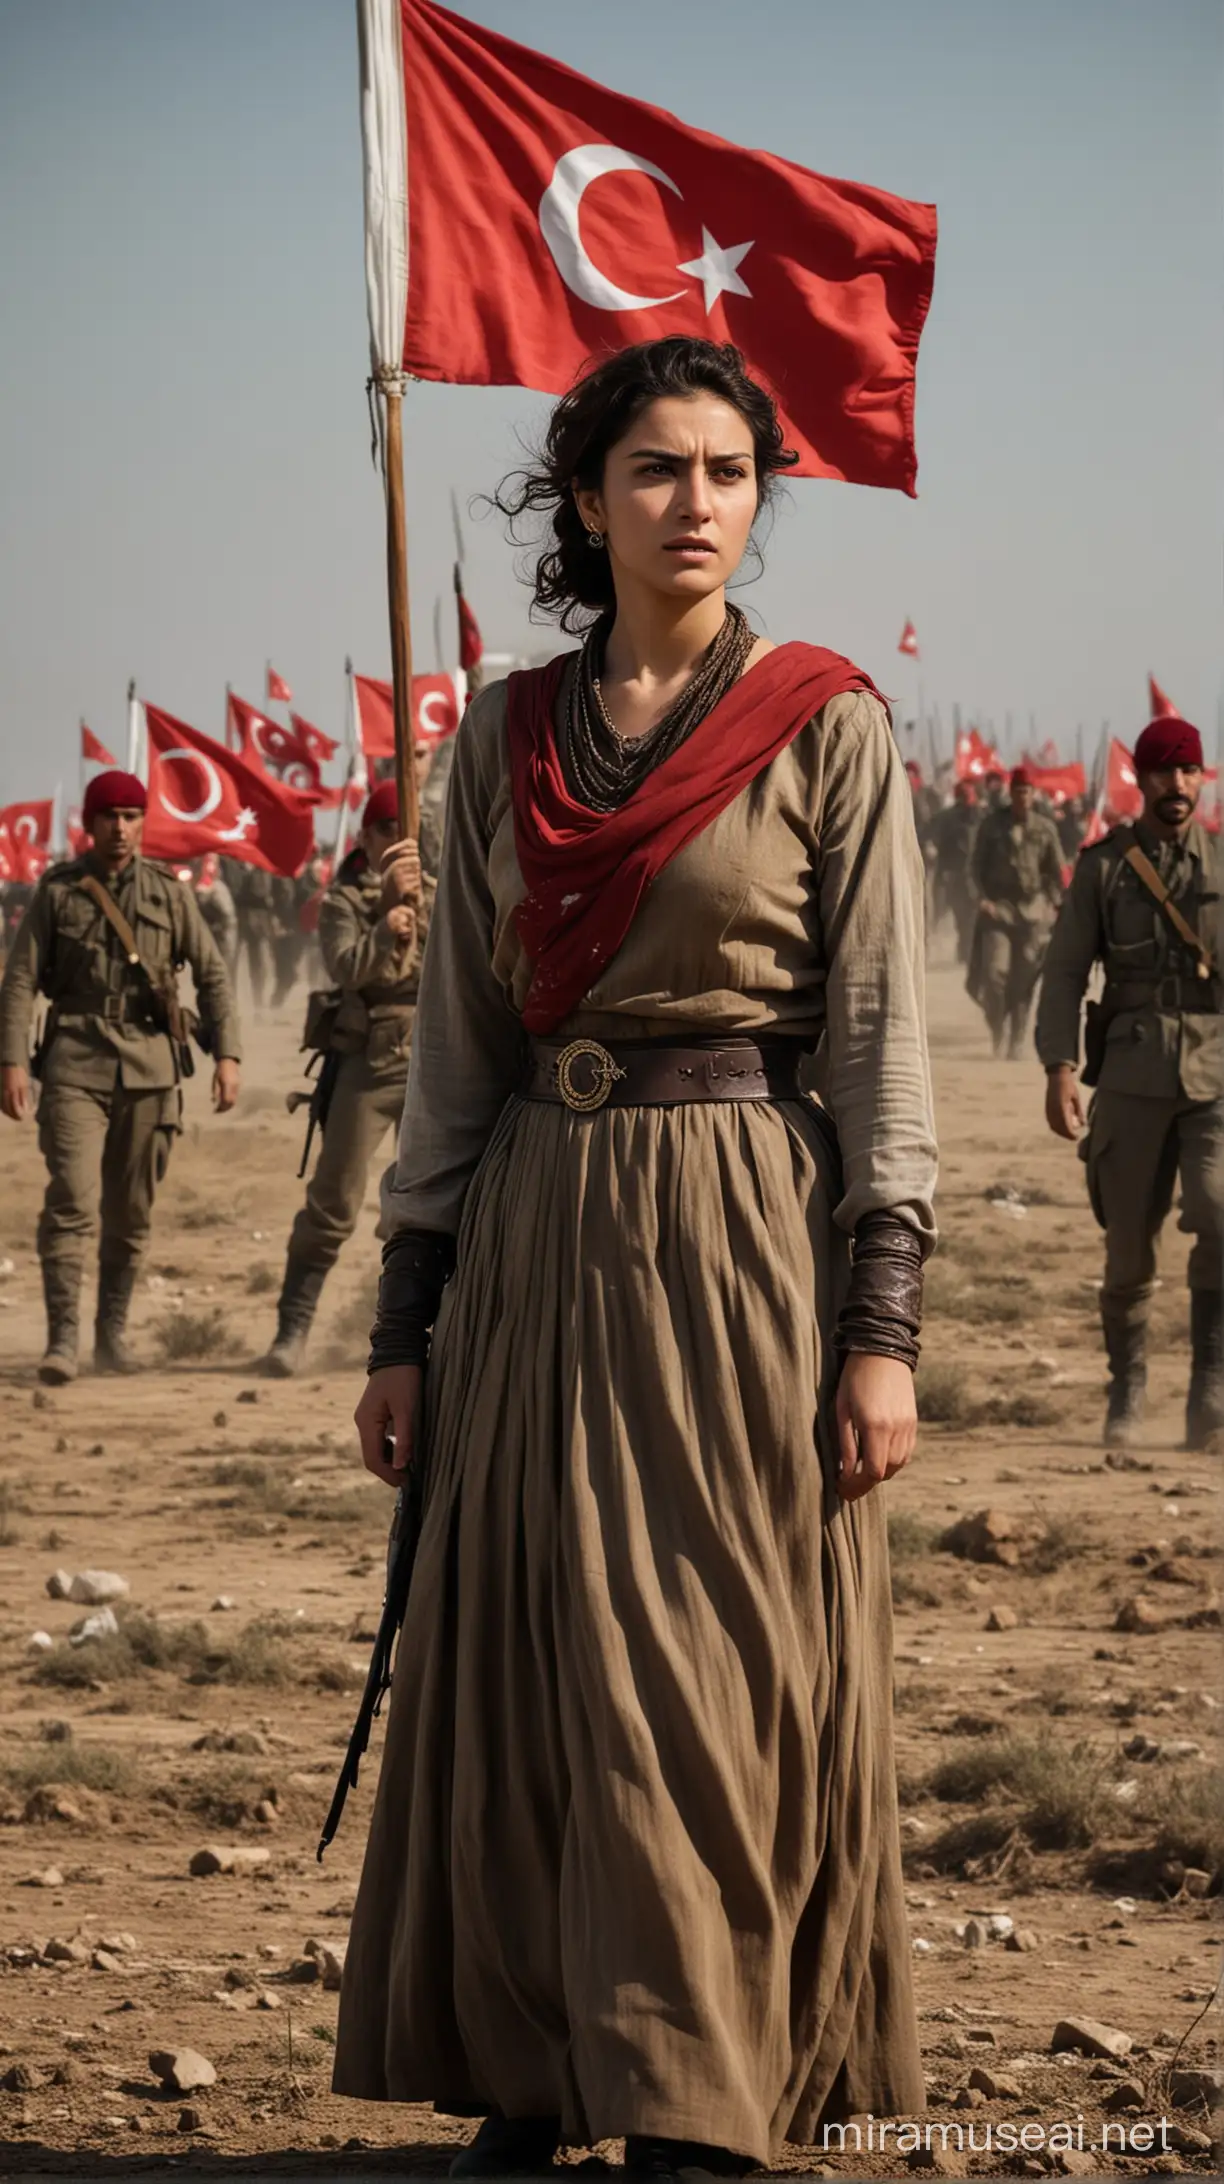 Describe a scene where Adanalı Rahmiye Hanım is portrayed as a courageous woman who participated in the Turkish War of Independence. She stands tall on the battlefield, with the Turkish flag draped over her shoulder and a determined expression on her face, surrounded by the devastating effects of war.

